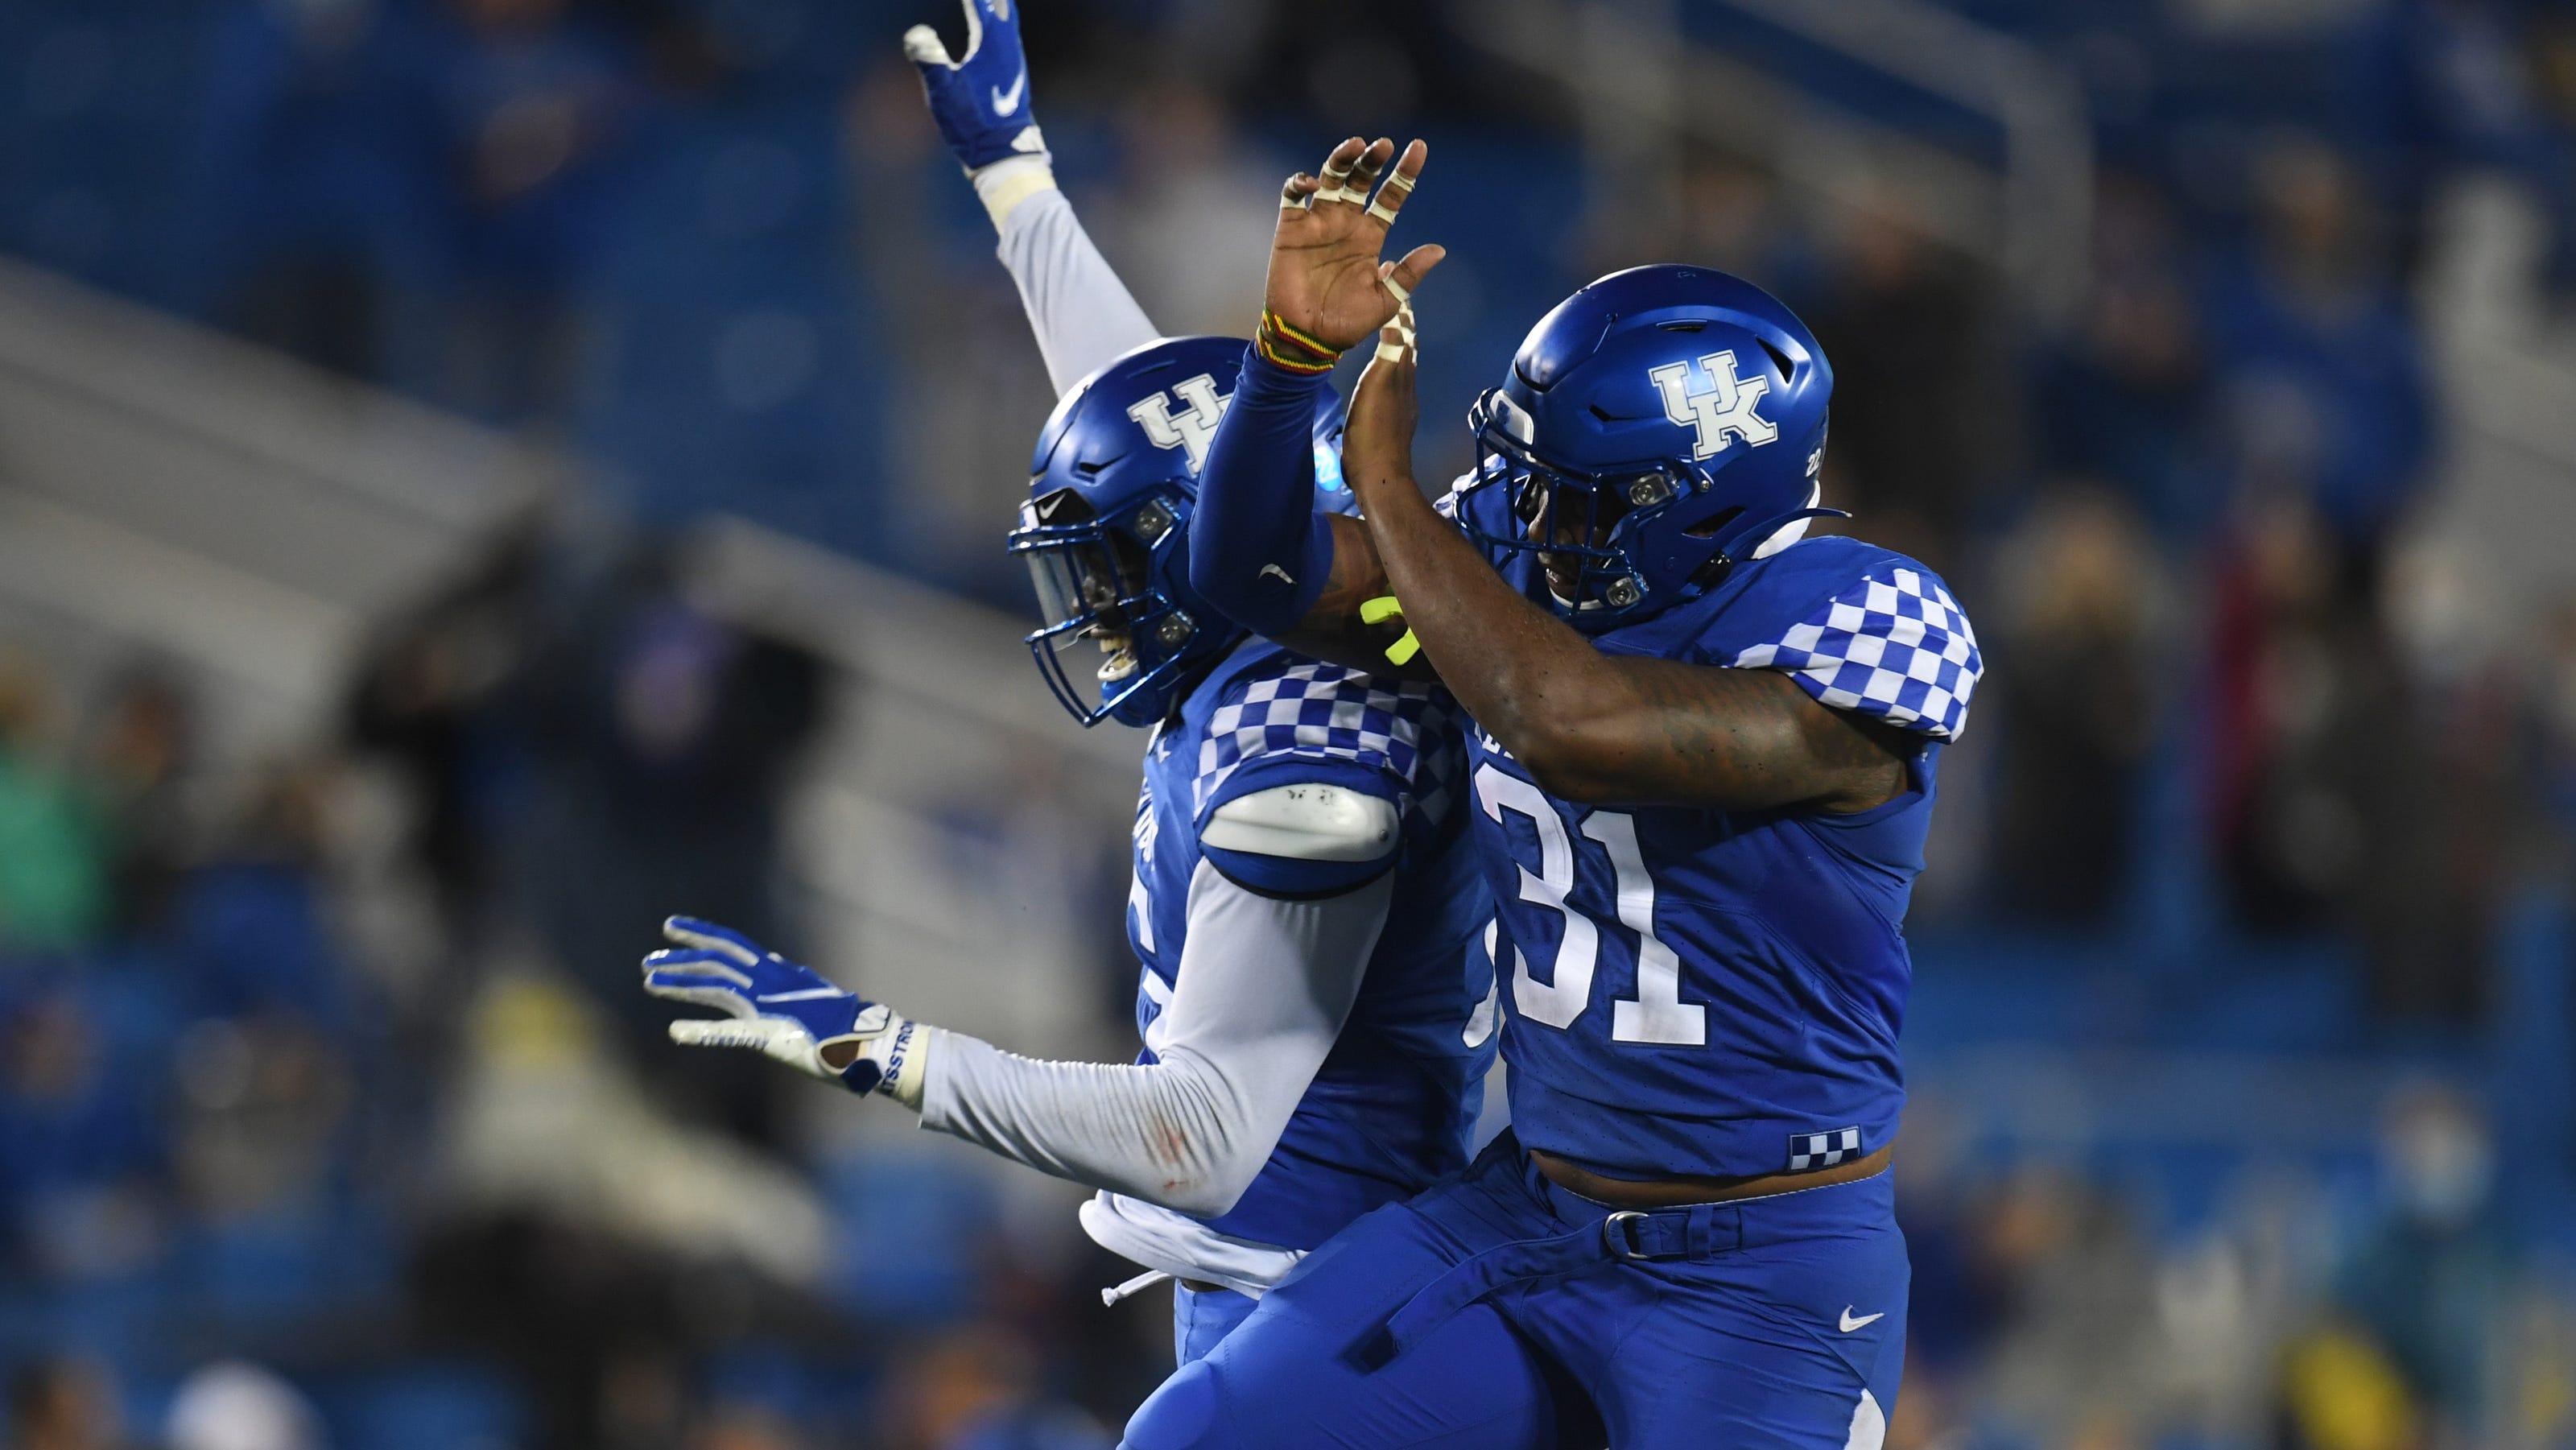 Kentucky football schedule 2020: Game times, results, recaps